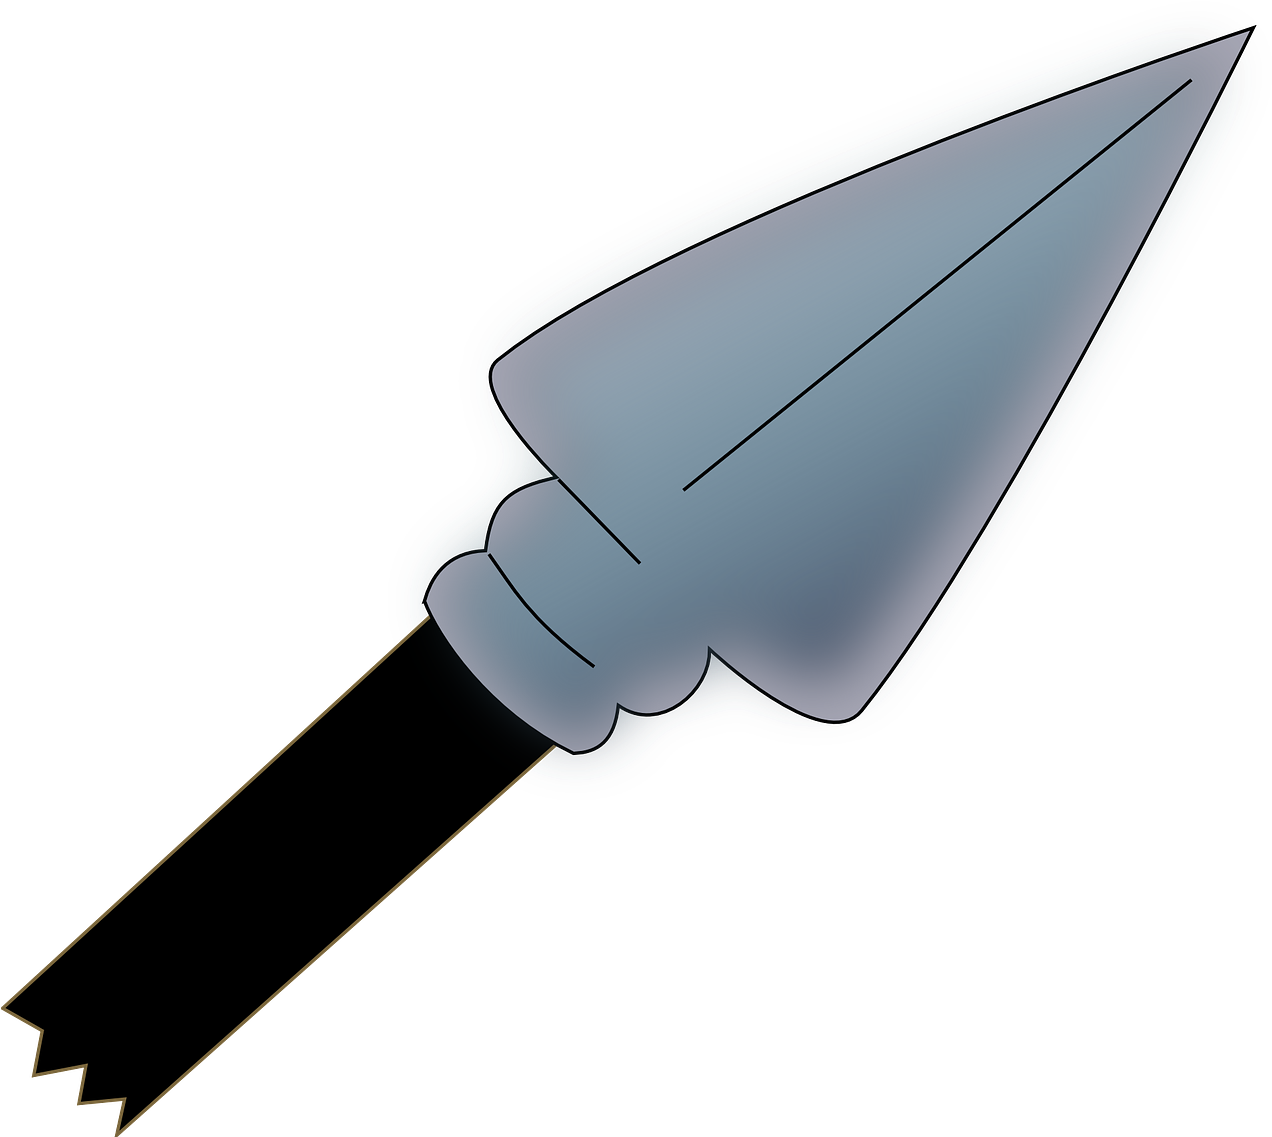 A Sharp Pointed Weapon On A Black Background